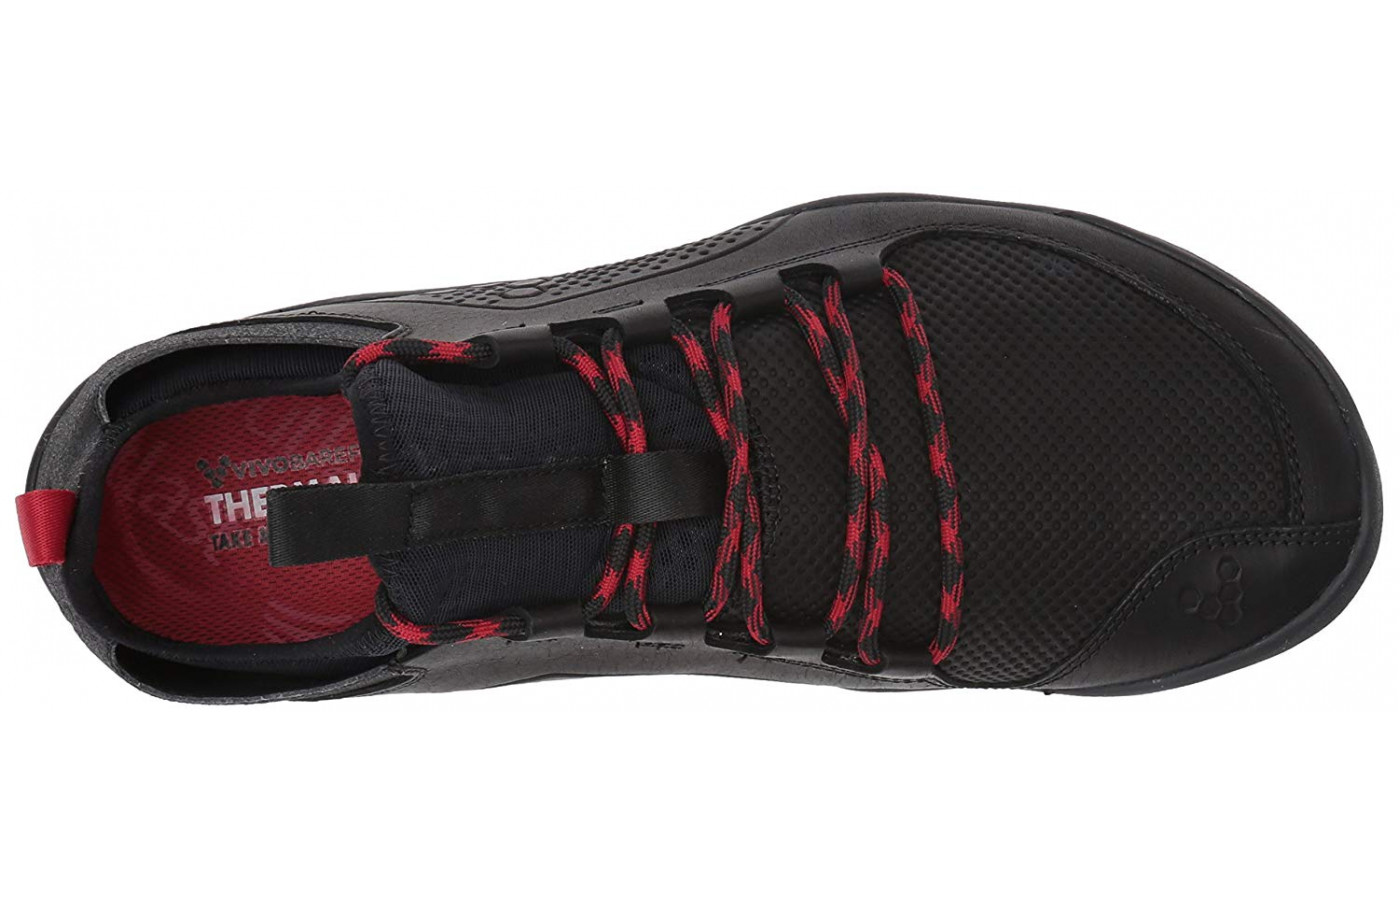 The Primus Trek's removable thermal insole keeps the foot comfortable throughout all seasons